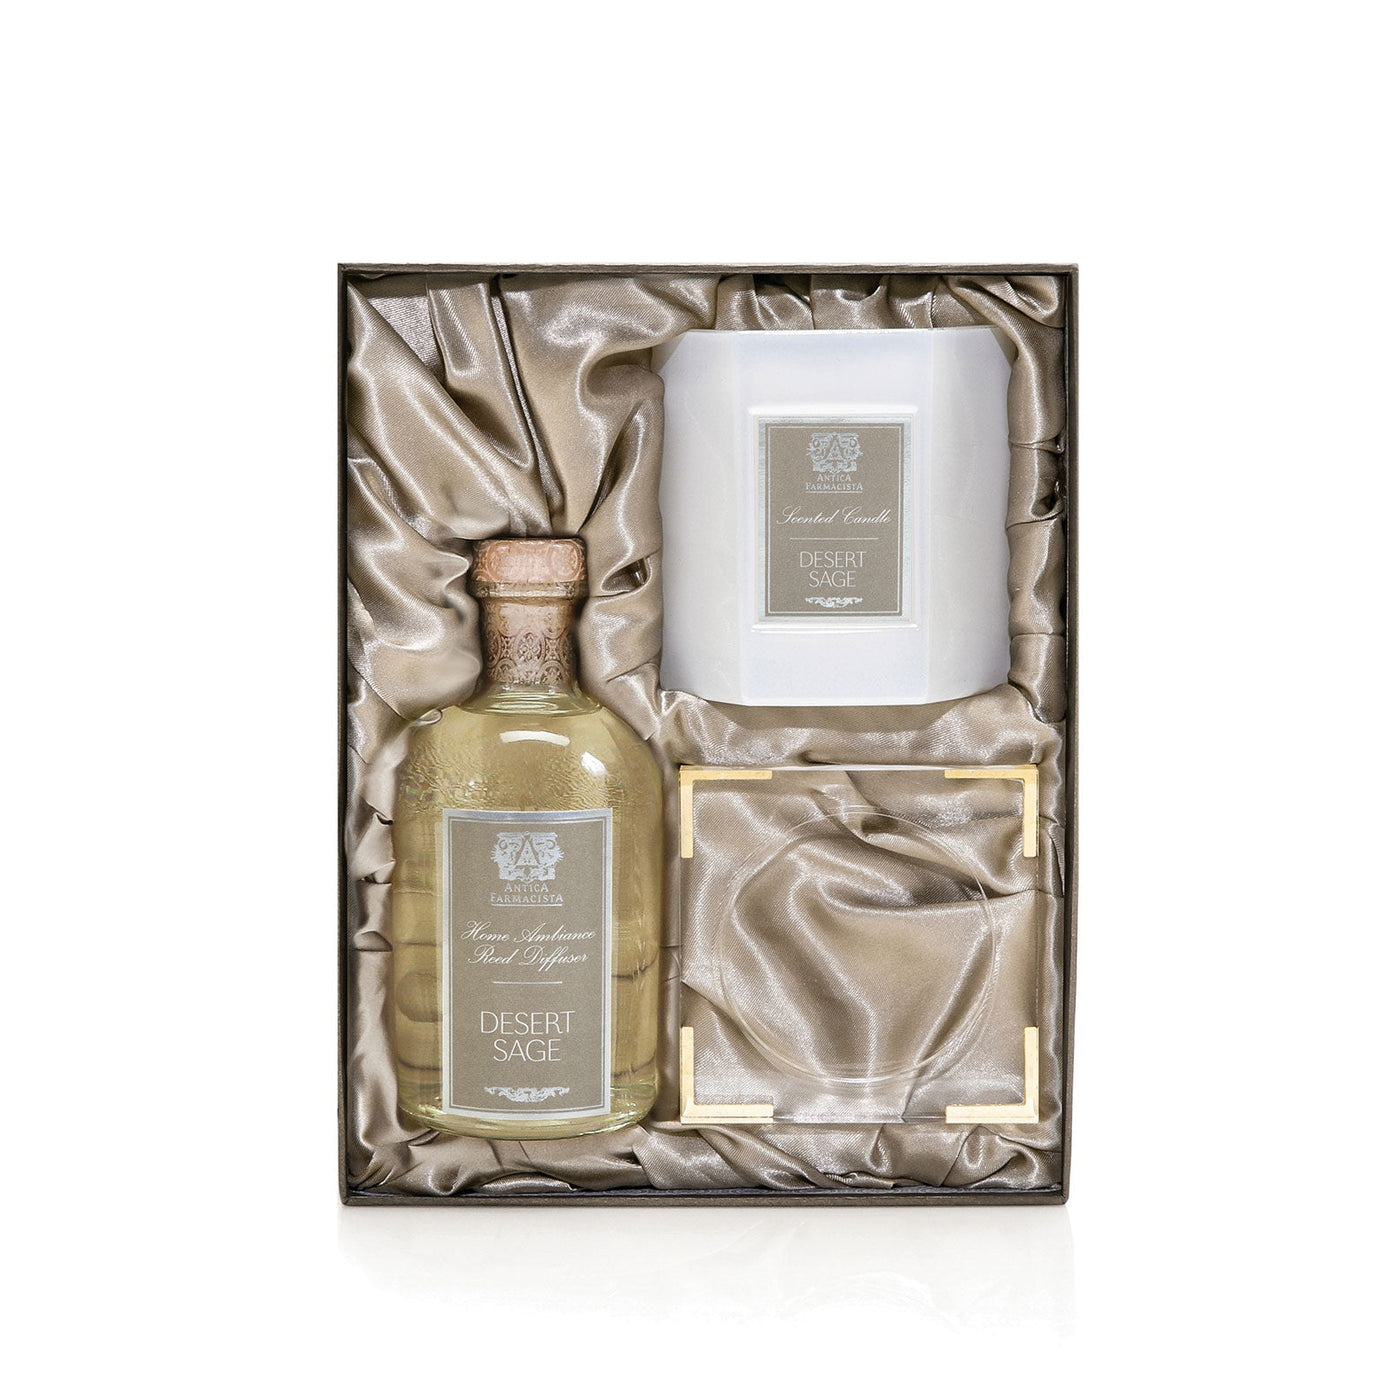 Desert Sage - Home Ambiance Diffuser, Candle & Lucite Tray Gift Set